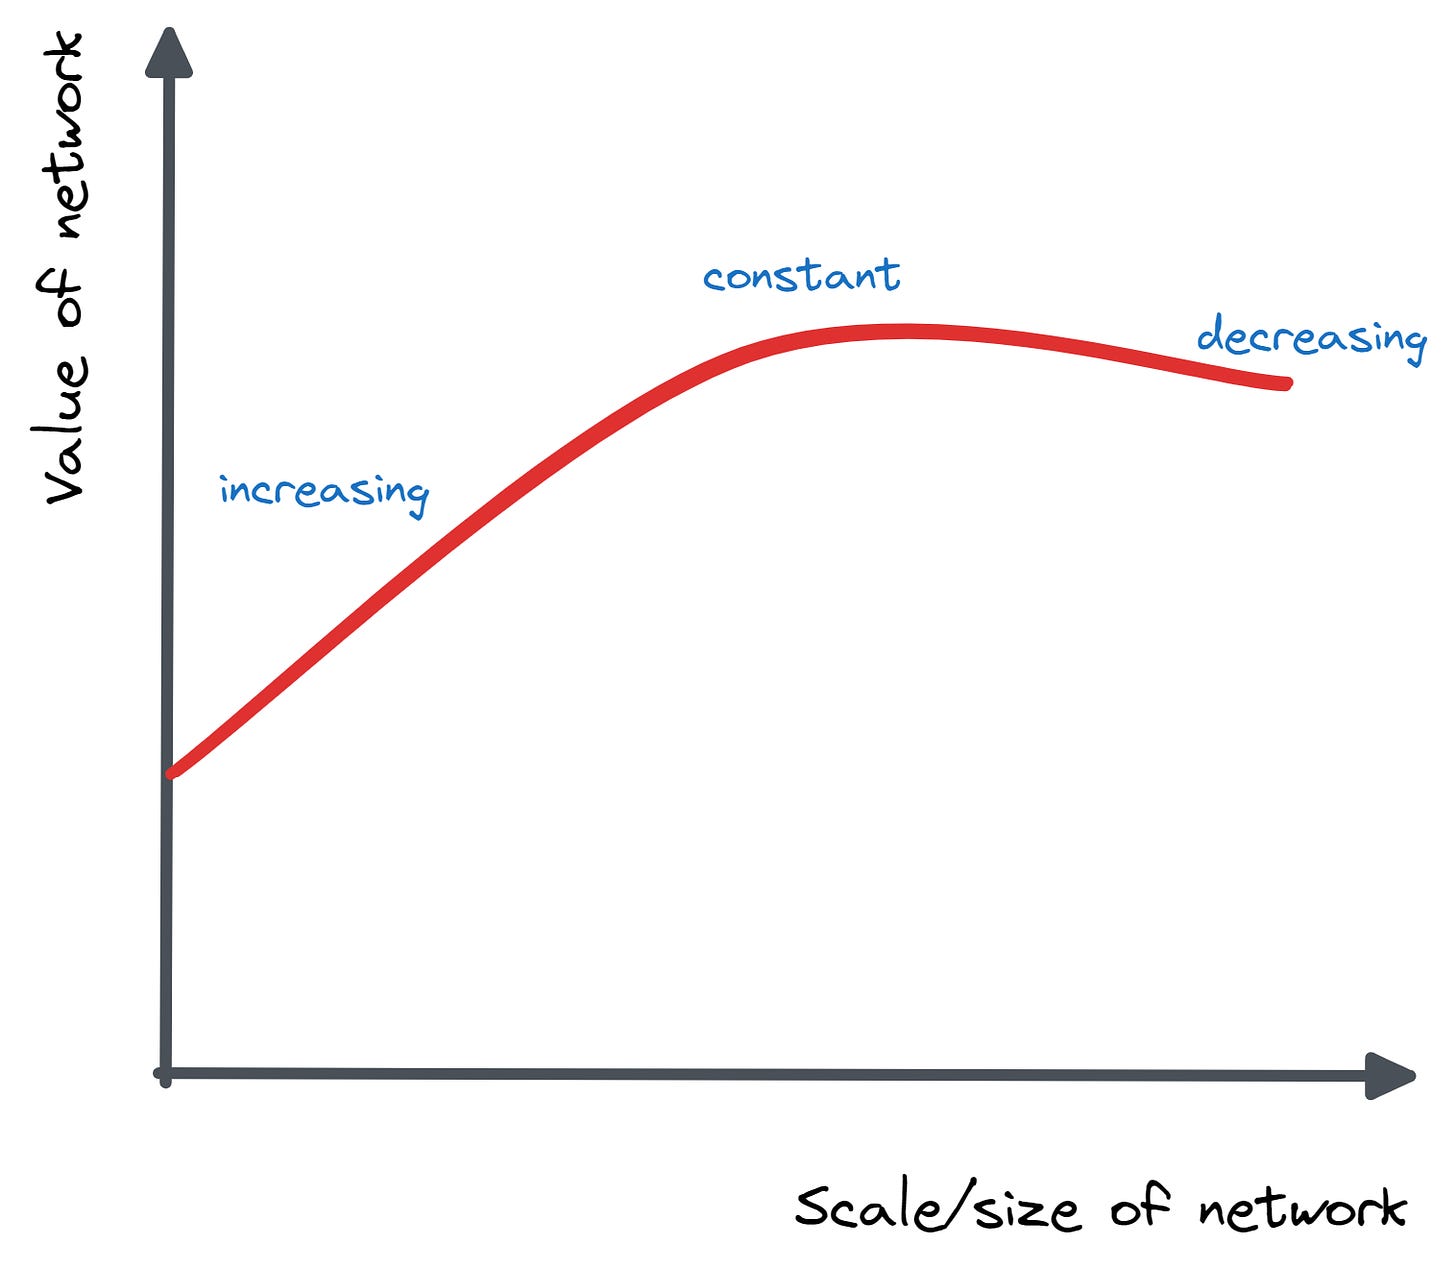 Returns to scale and network size